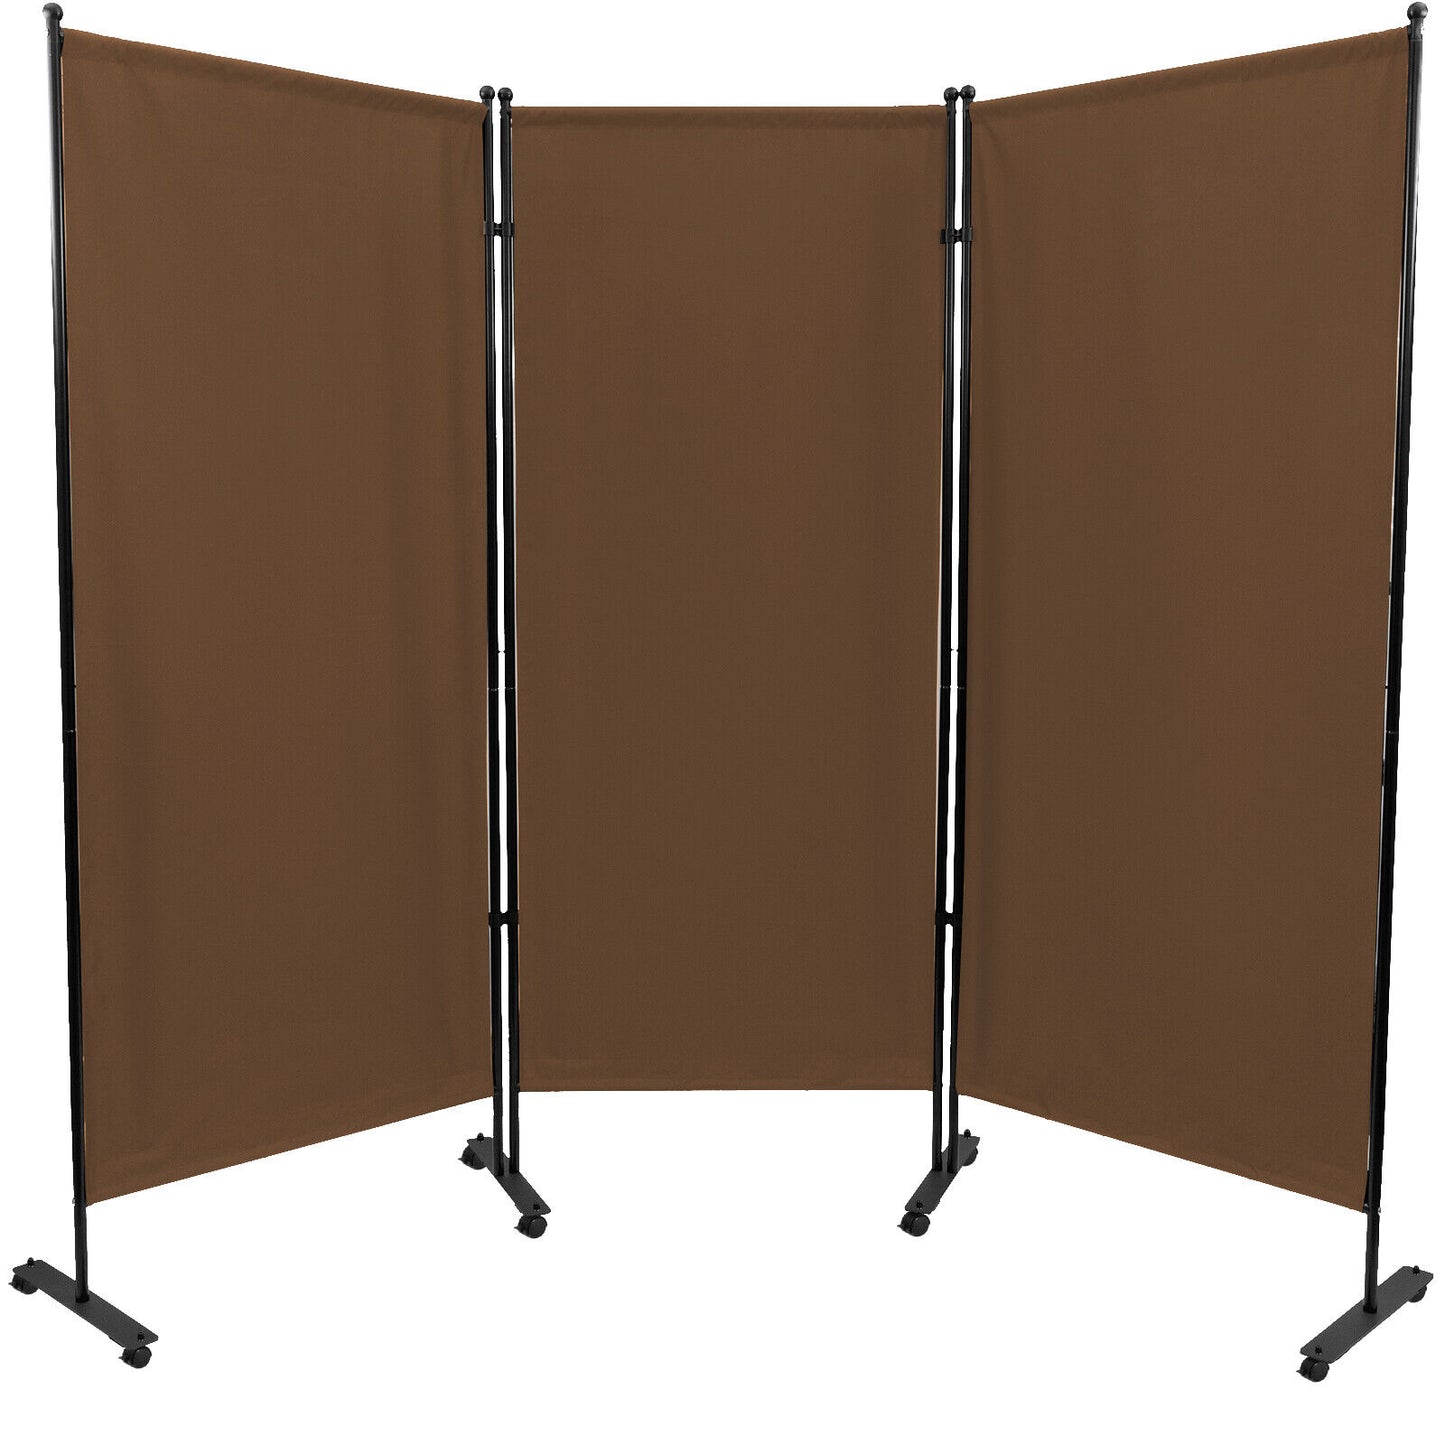 3 Panel Room Divider 9FT Tall Folding Privacy Screen Fabric Office Partition